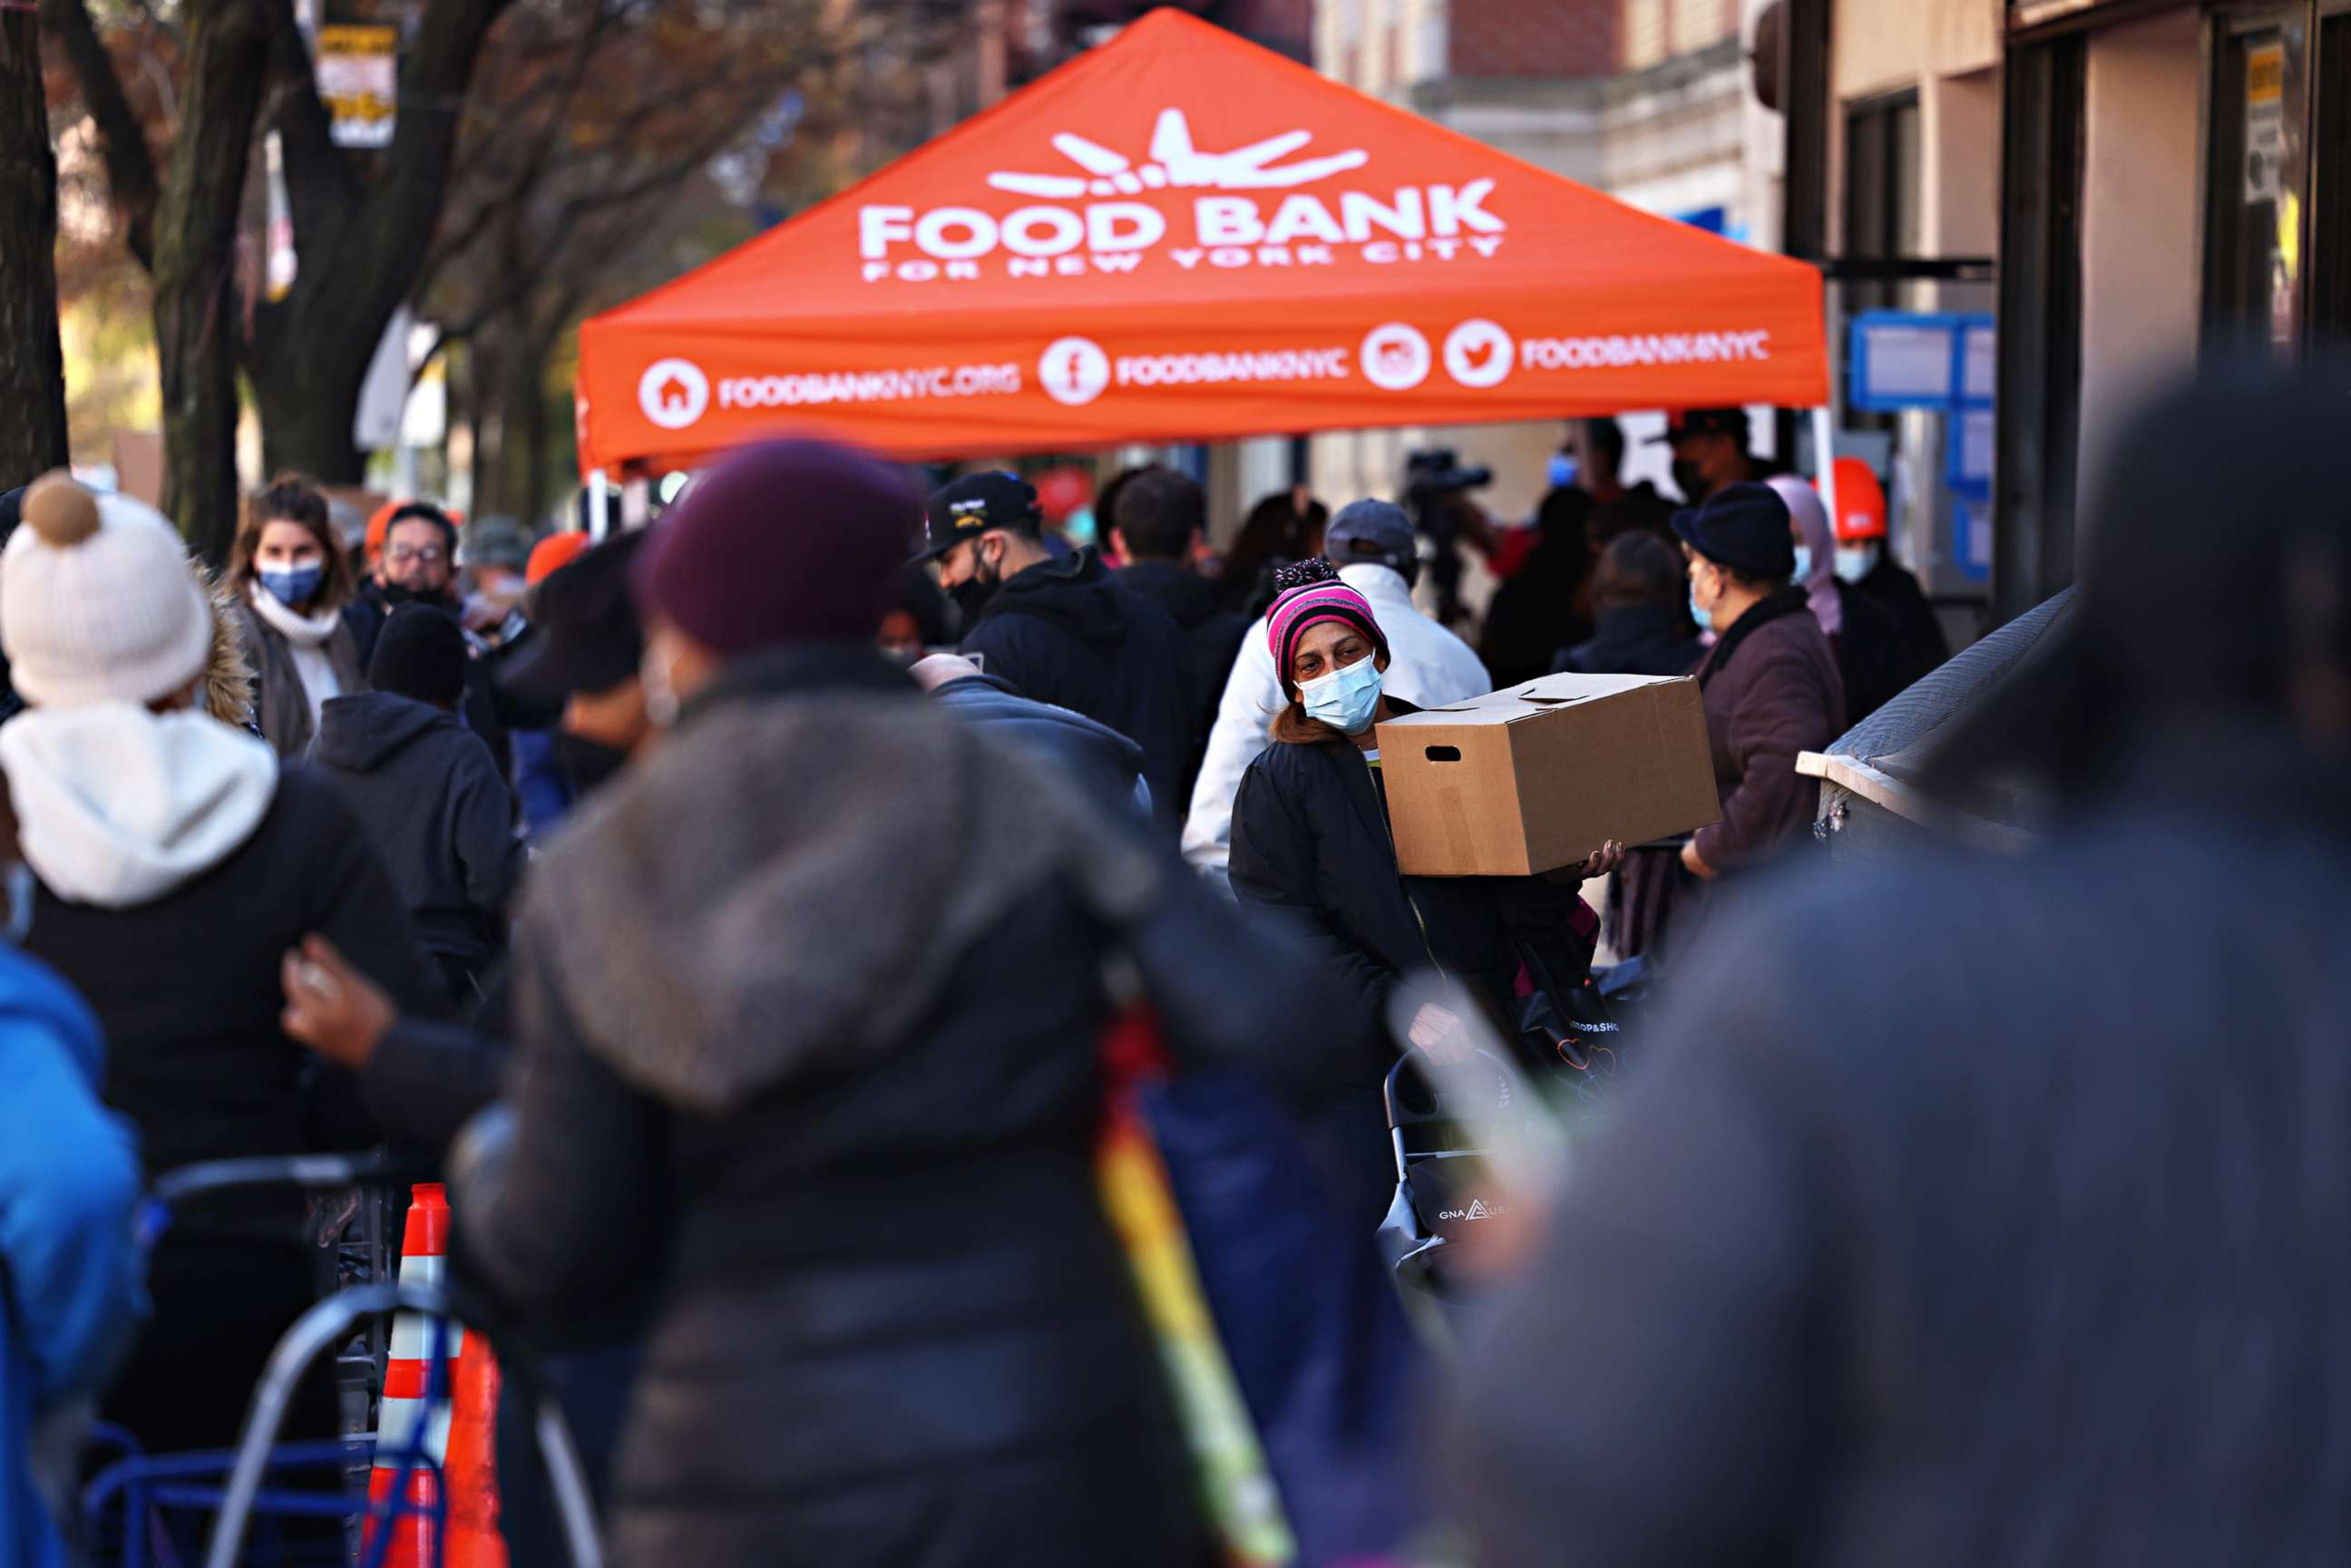 PHOTO: People wait in line for a Thanksgiving food distribution event at Food Bank For New York City in the Harlem neighborhood of New York City, on Nov. 16, 2020.